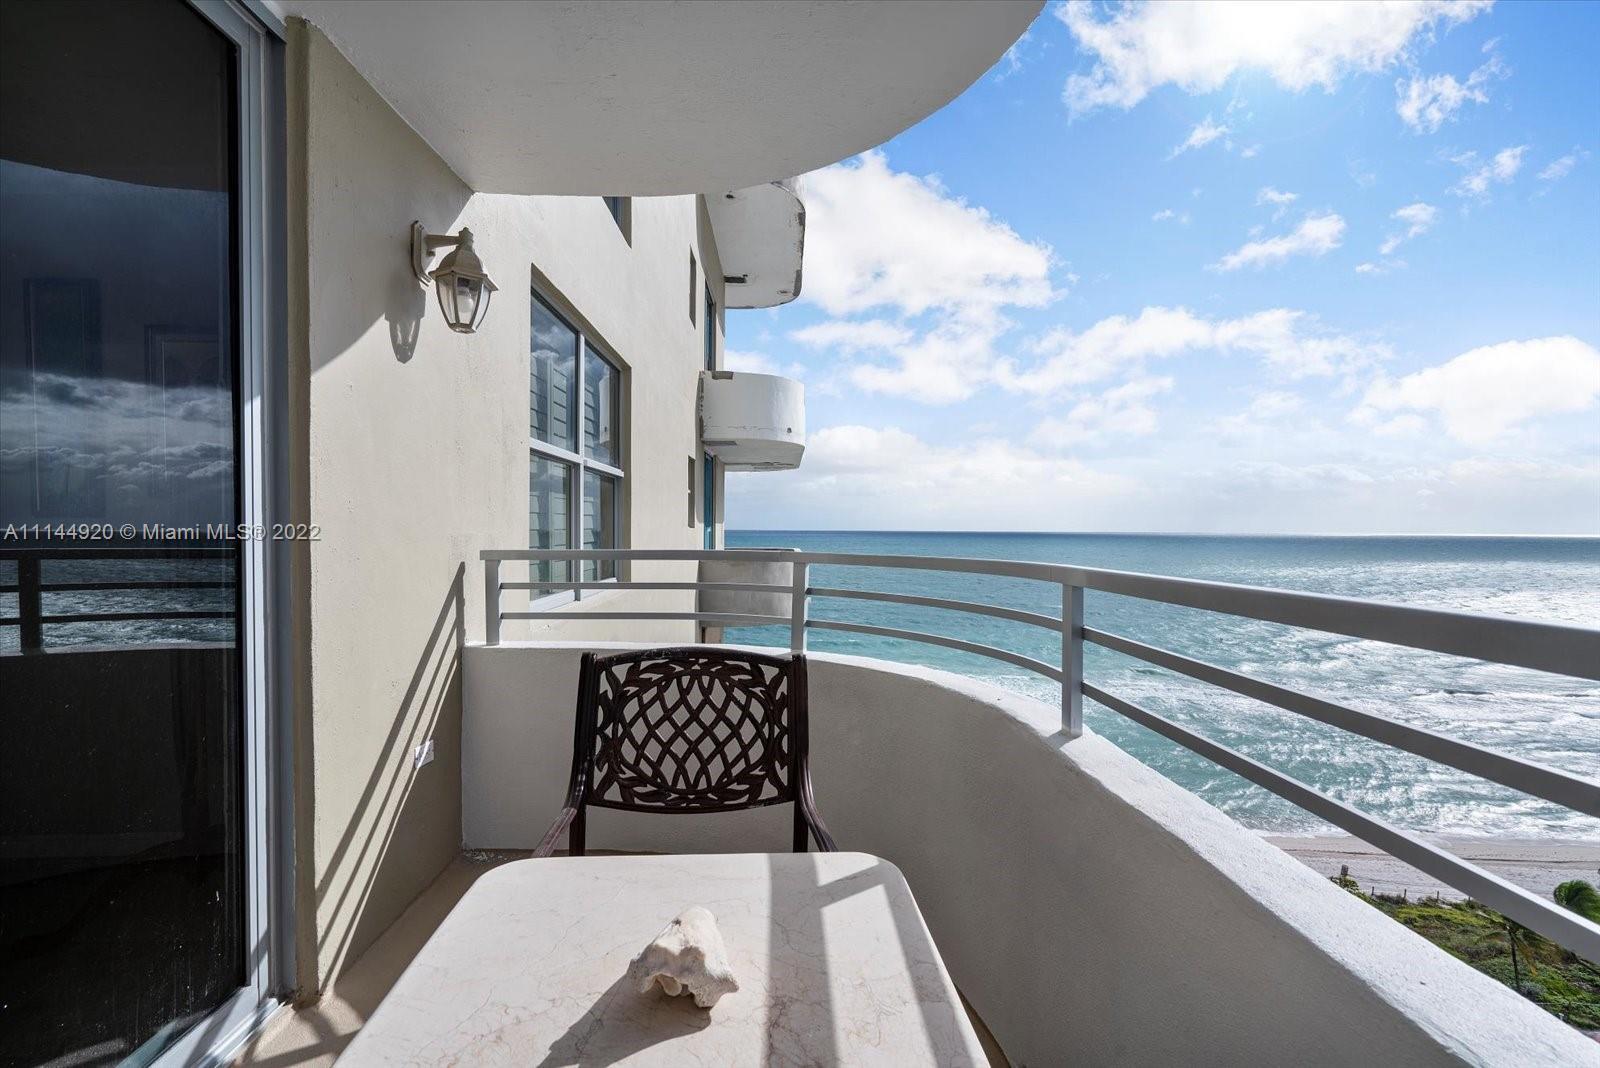 Stunning Studio furnished, remodeled and ready to move in. Ocean Front Building with Resort Style am